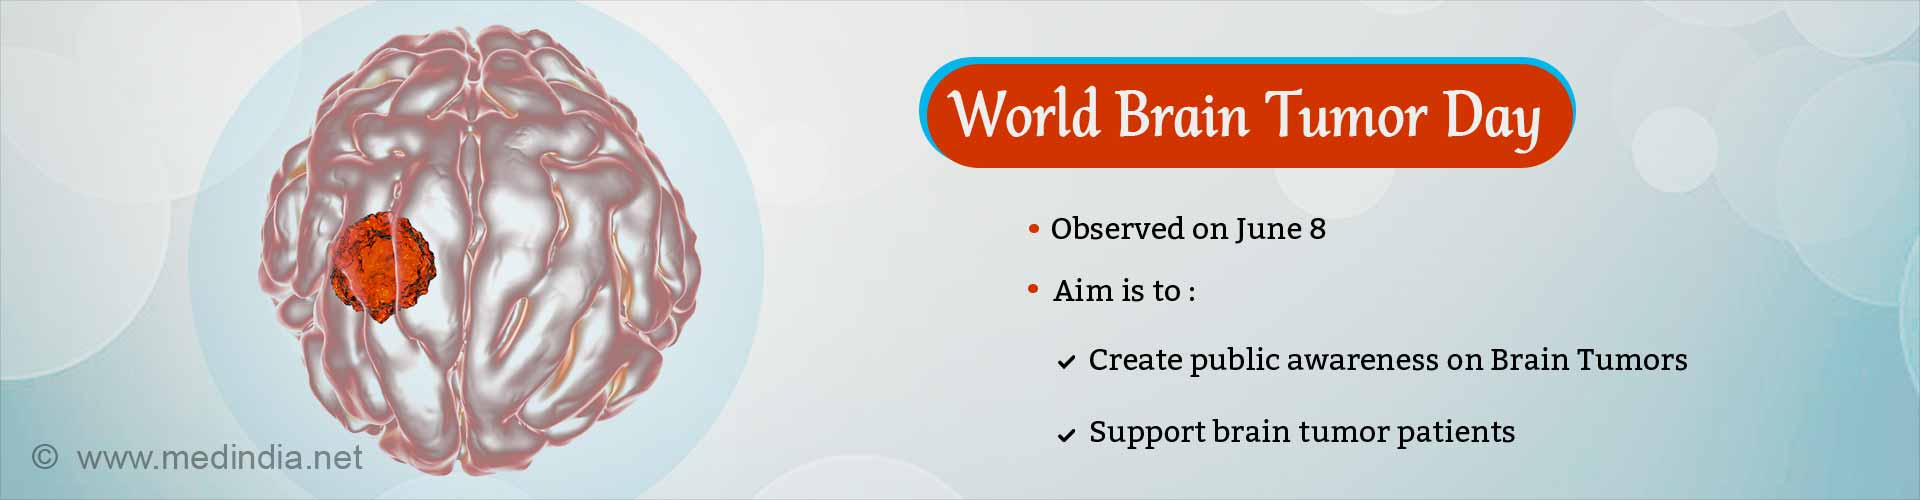 World Brain Tumor Day. Observed on June 8. Aim is to: Create public awareness on brain tumors. Support brain tumor patients.